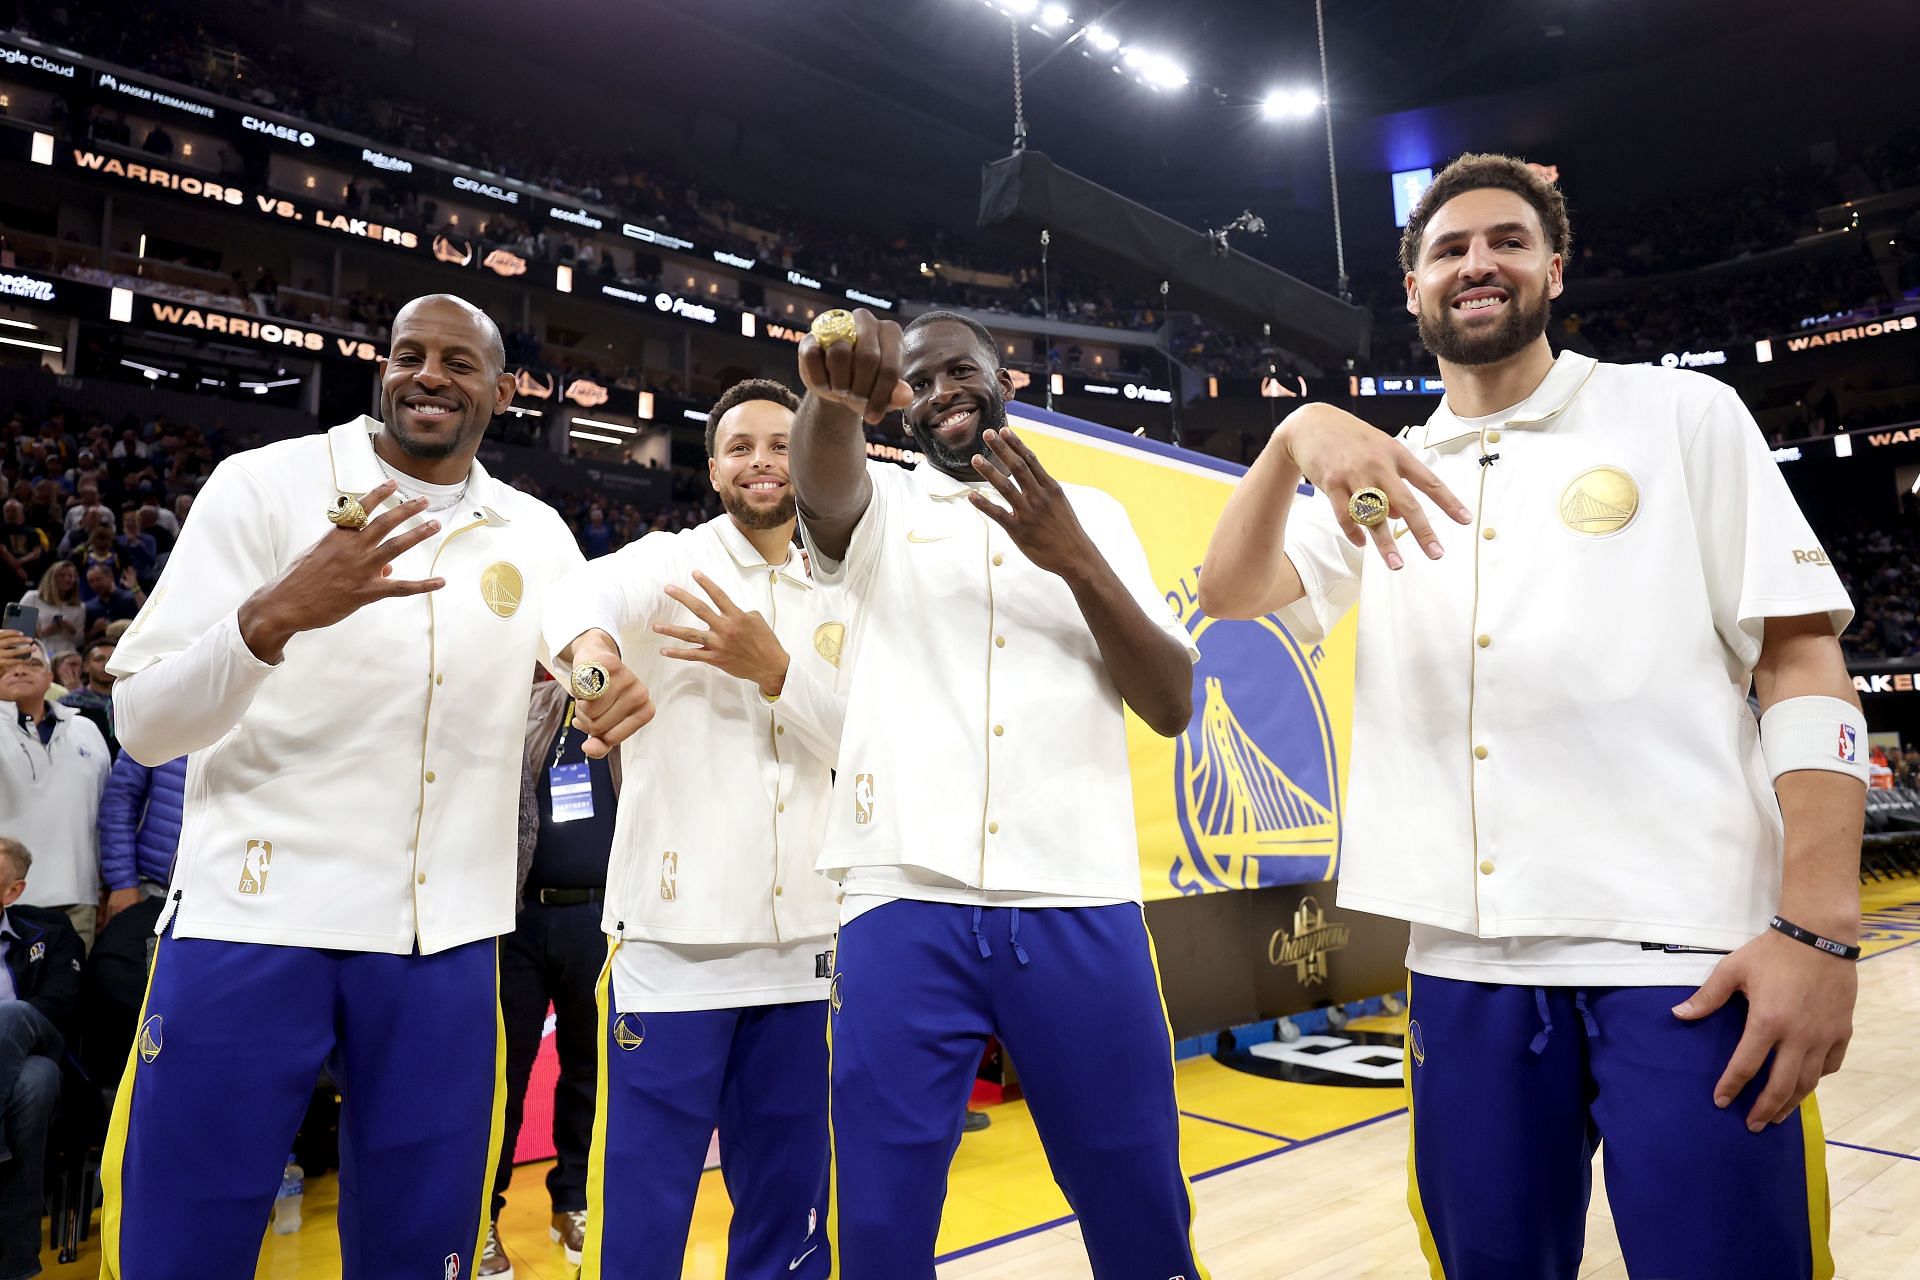 Andre Iguodala, Stephen Curry, Draymond Green, and Klay Thompson with their fourth NBA championship ring